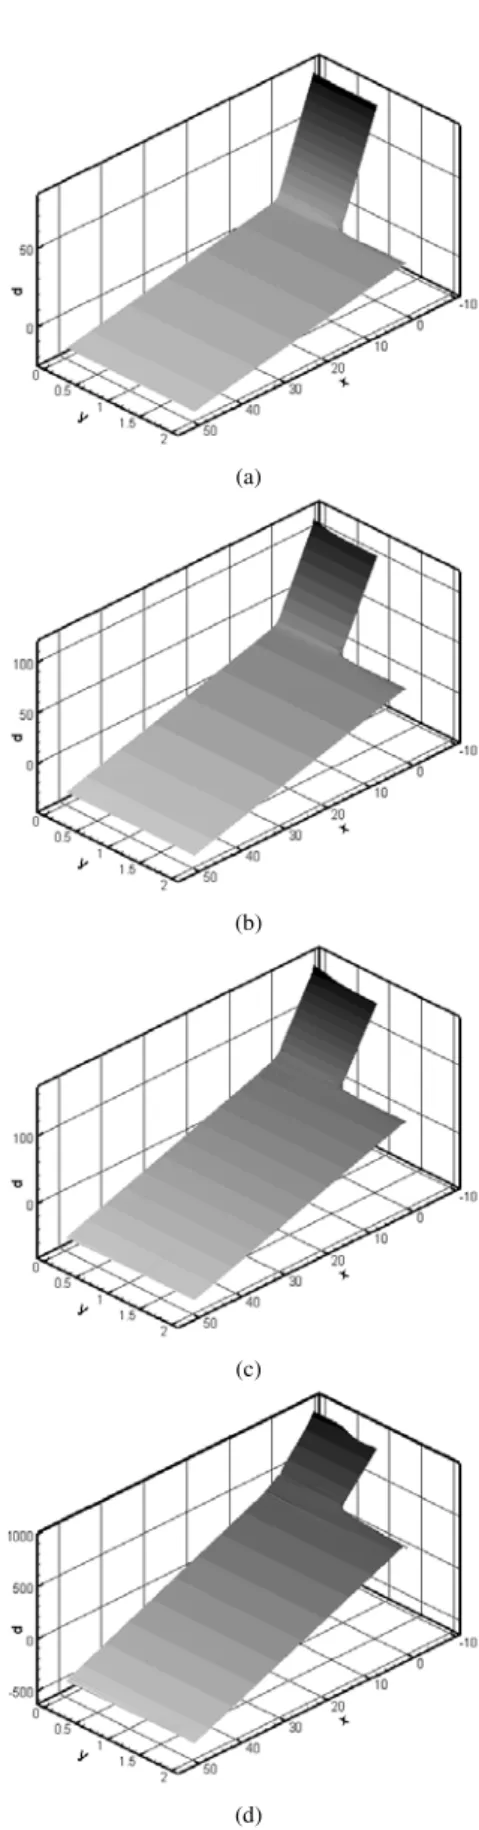 Figure 13. Pressure contours and elevation for planar flows: (a) Bn=0.2; 